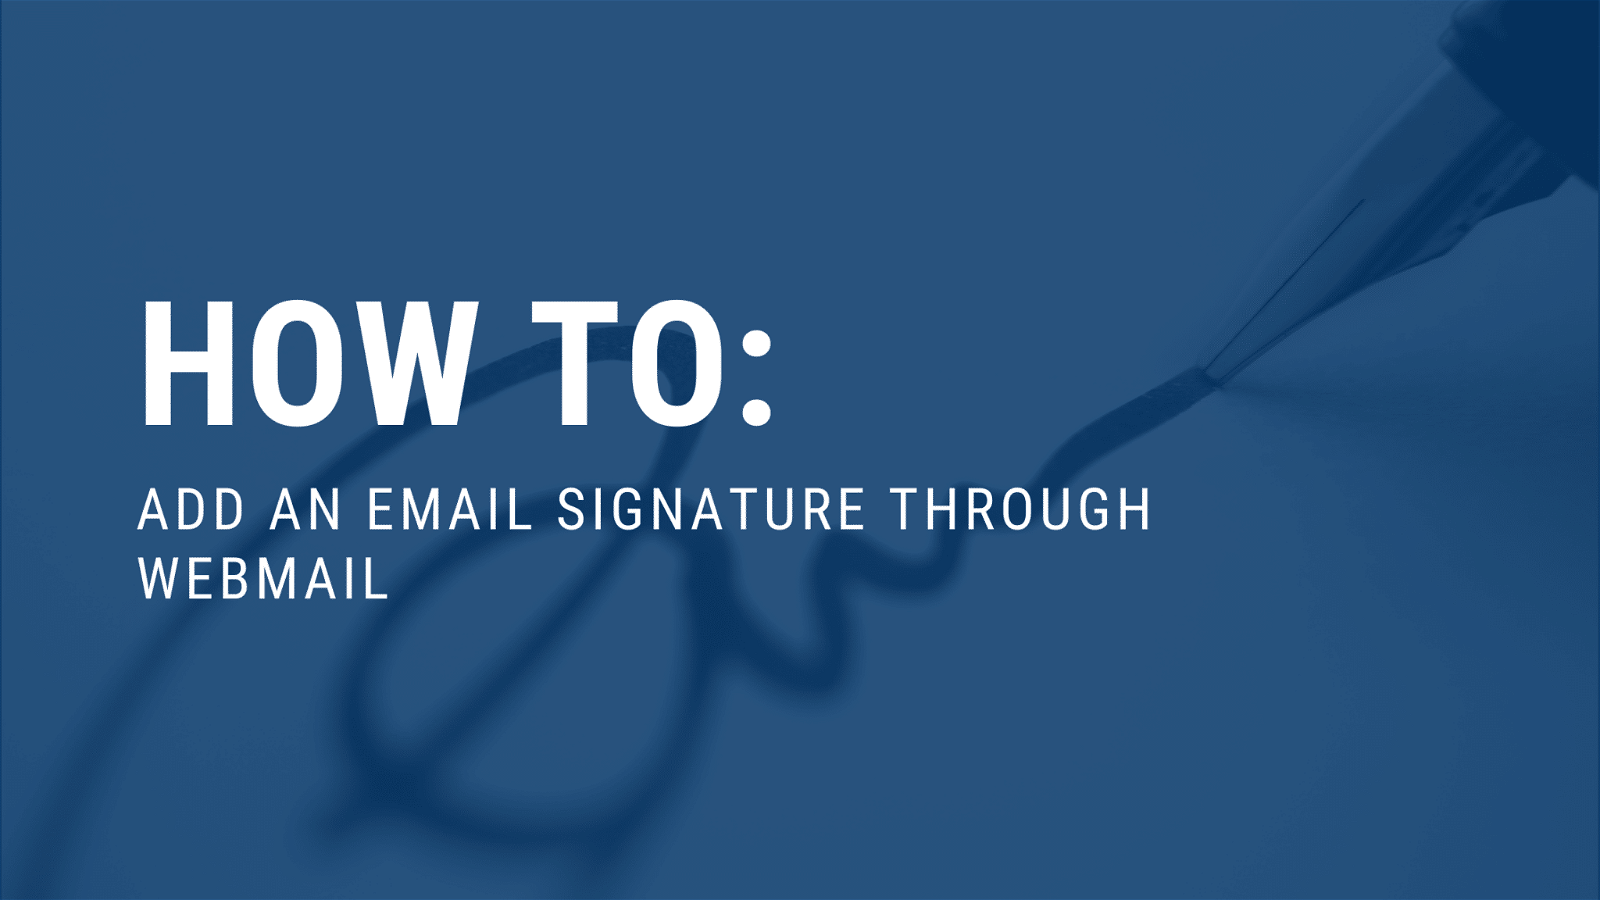 The image shows instructions on how to add an email signature through webmail.